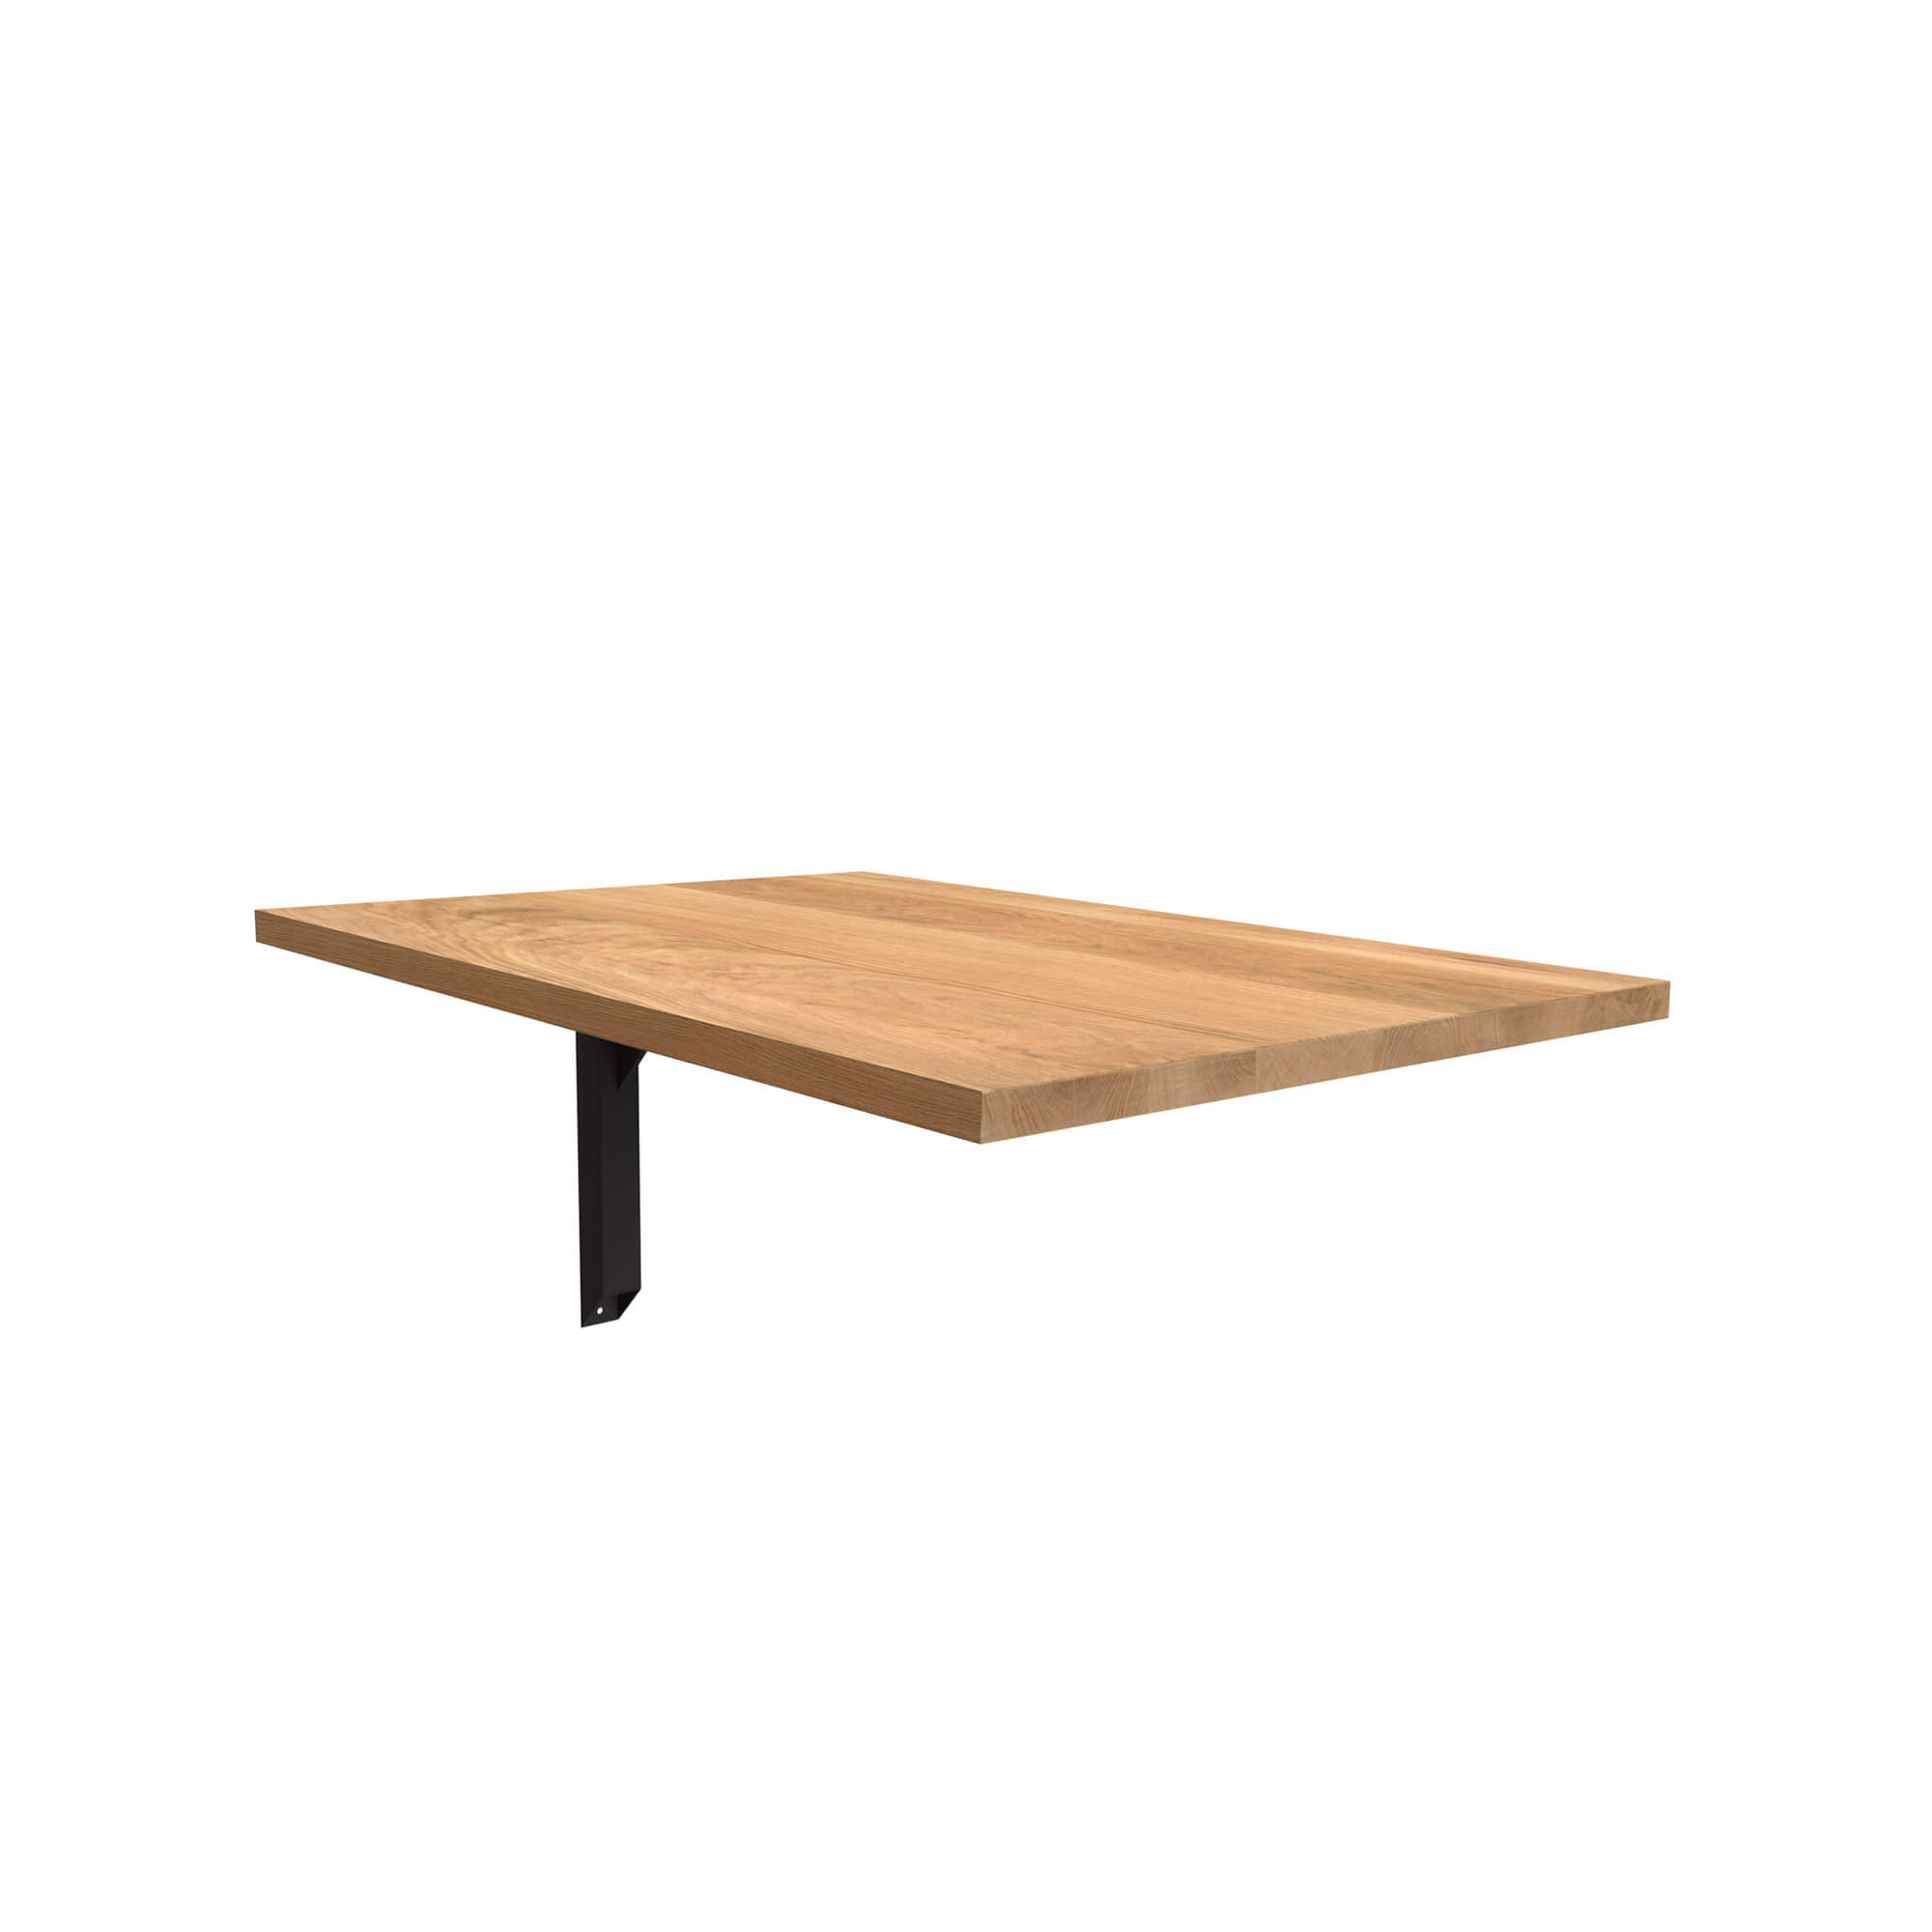 Cantilever table